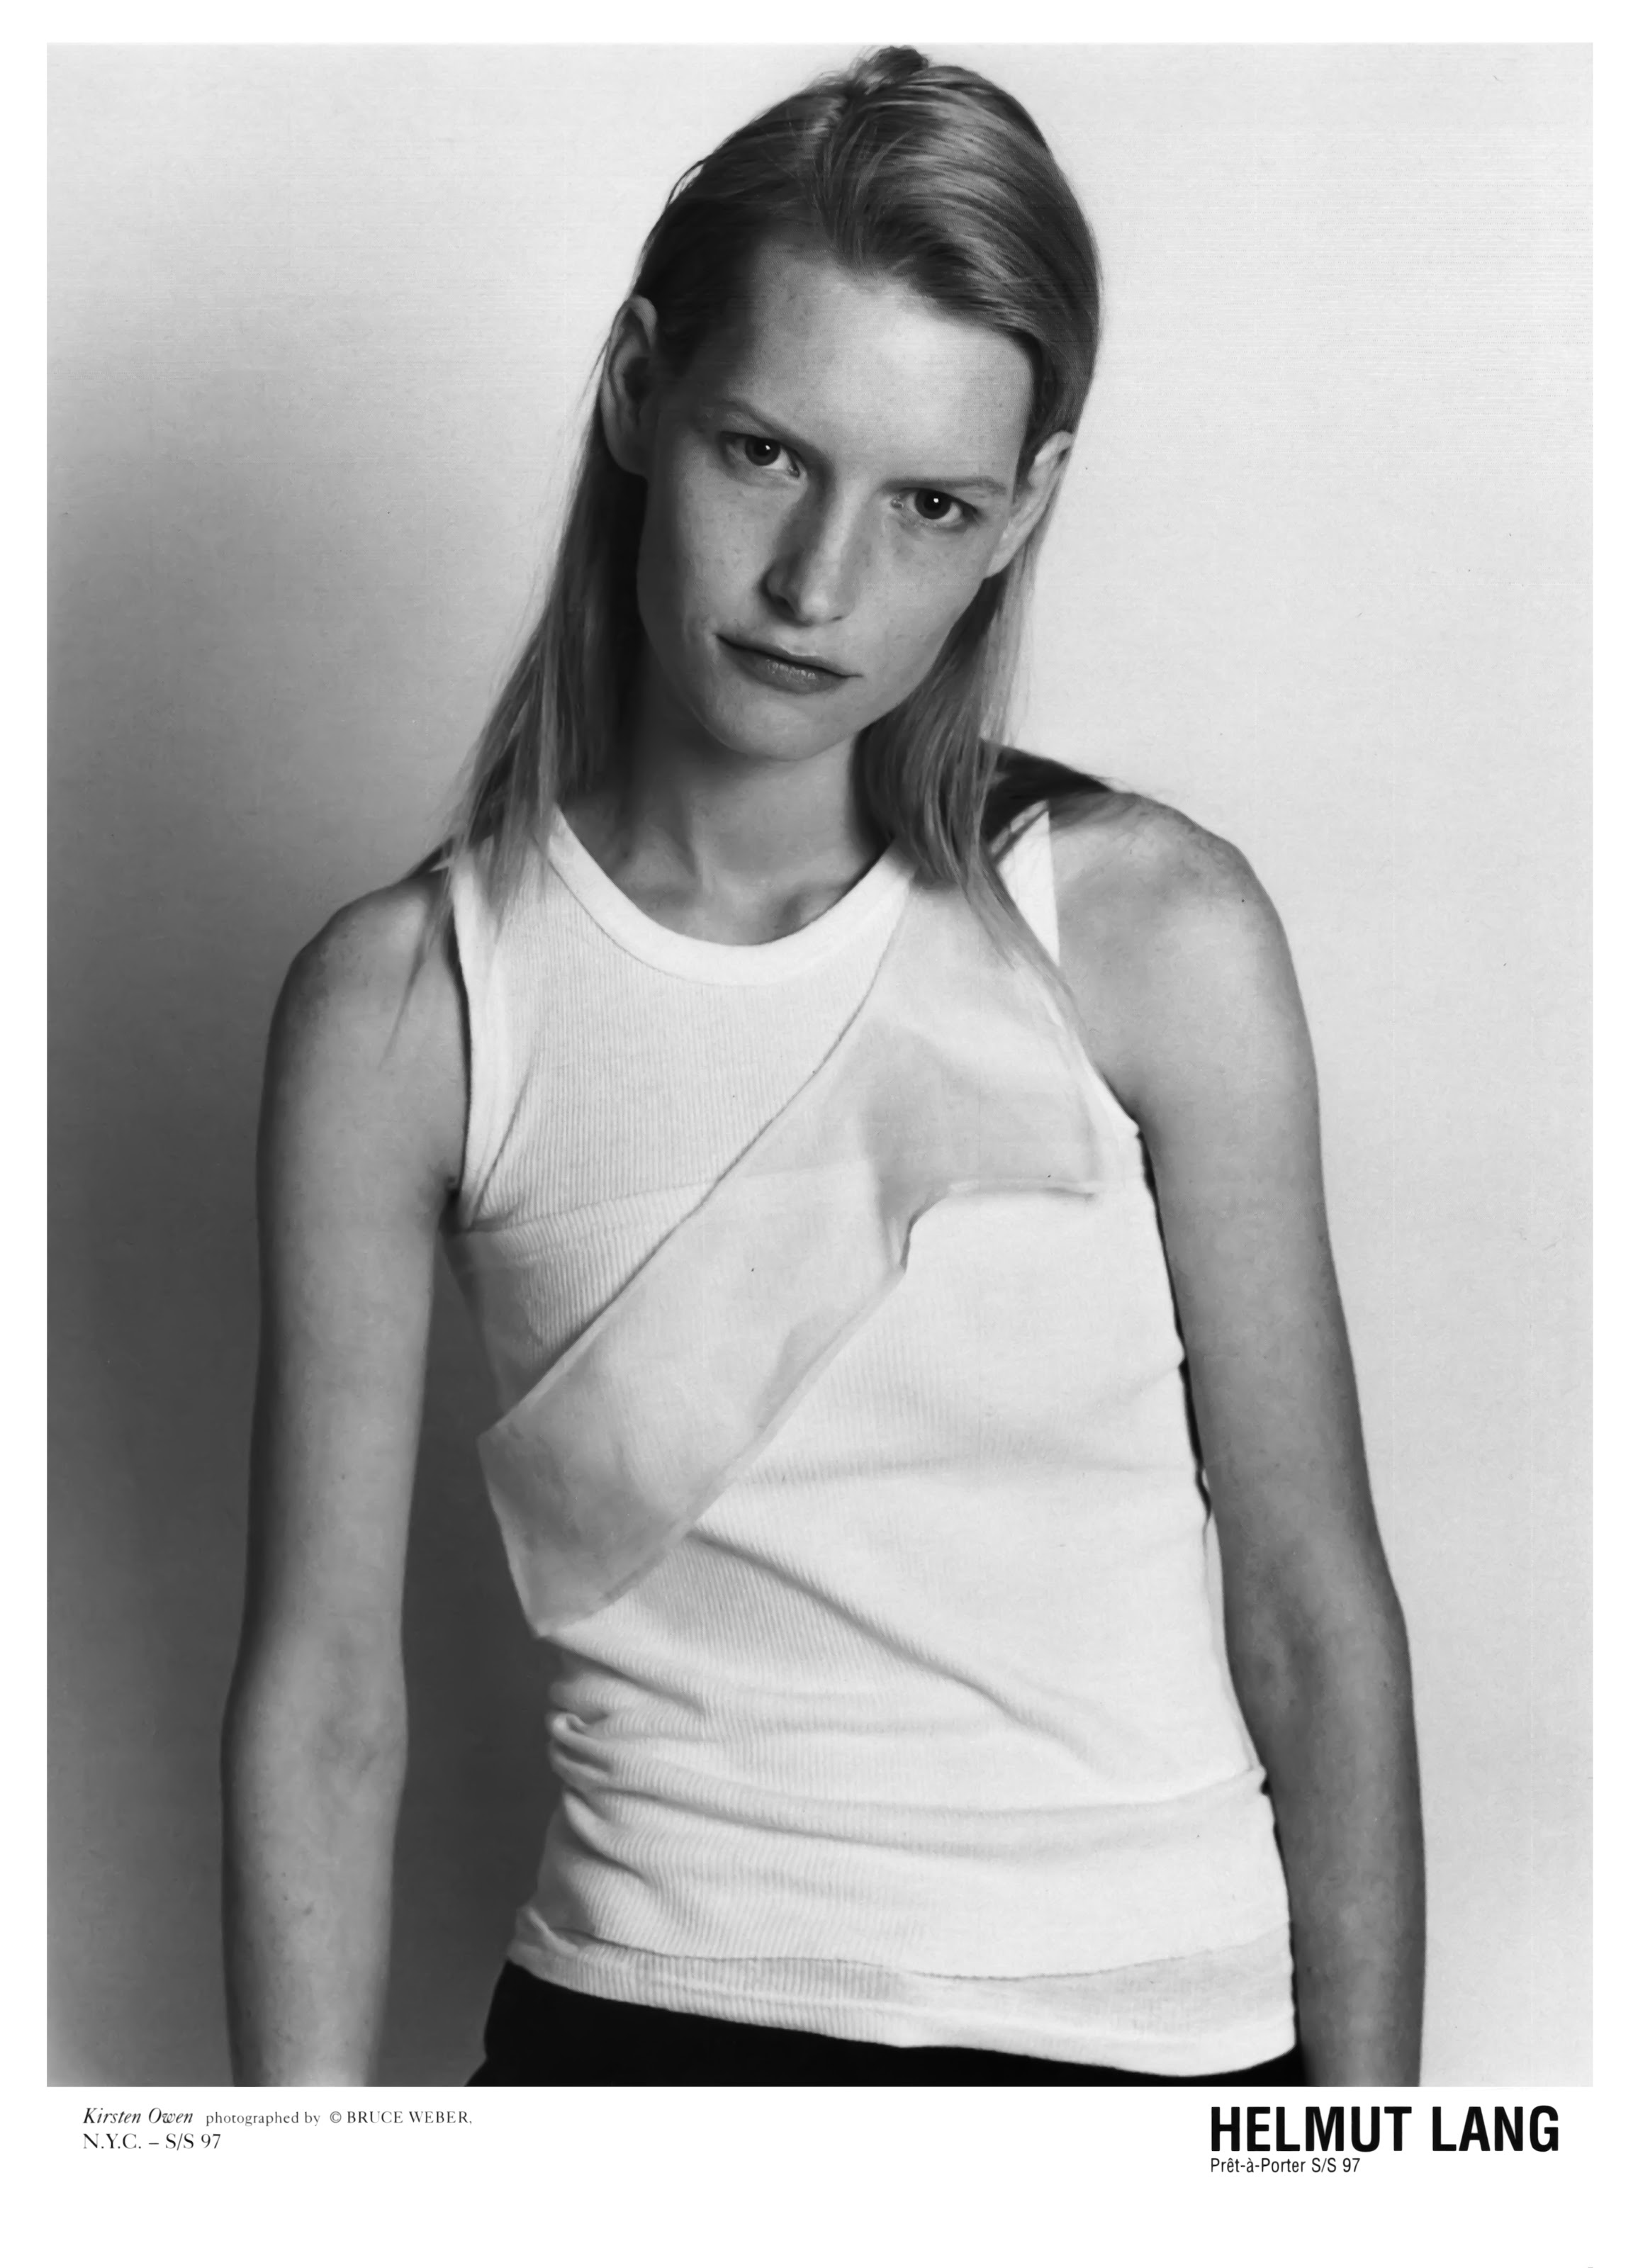 Helmut Lang's iconic campaigns